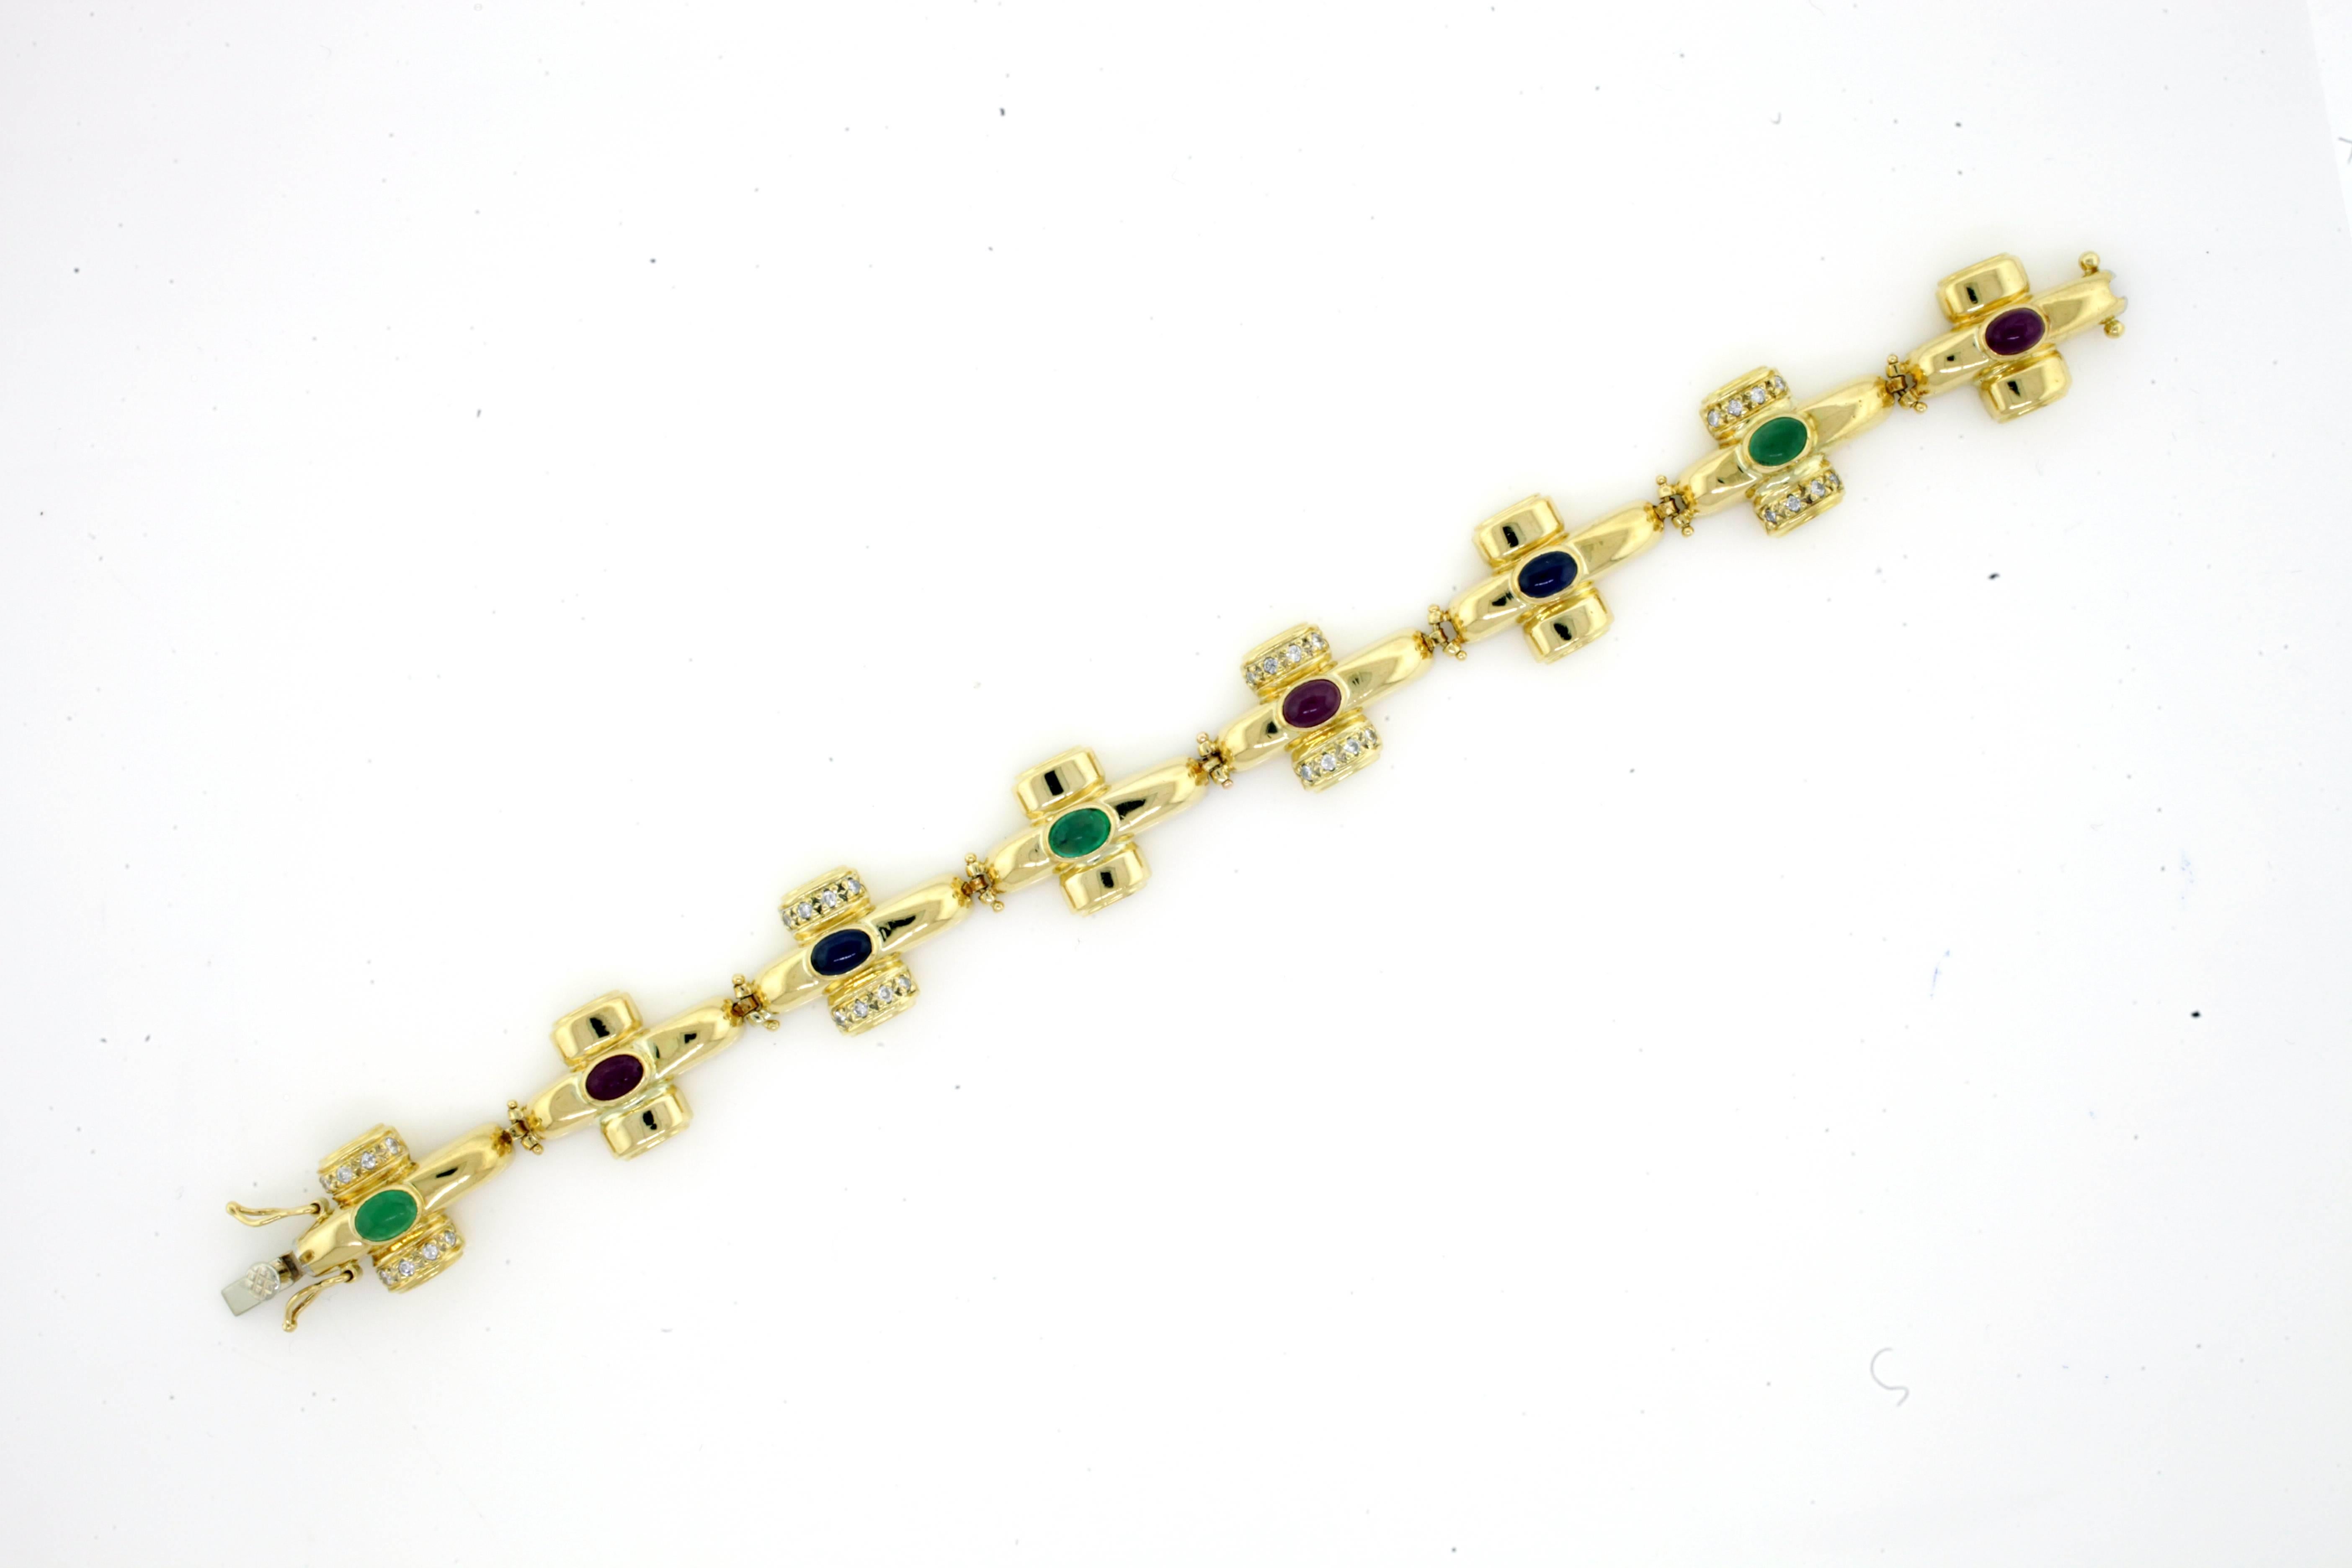 A tasteful and colorful combination of precious materials is employed in fabulous fashion in this enchanting bracelet.
Vintage Bracelet XOX Links Ruby Emerald Sapphire Cabochons Gold Bracelet.
Length: 7 inches
Width: 0.5 inches
